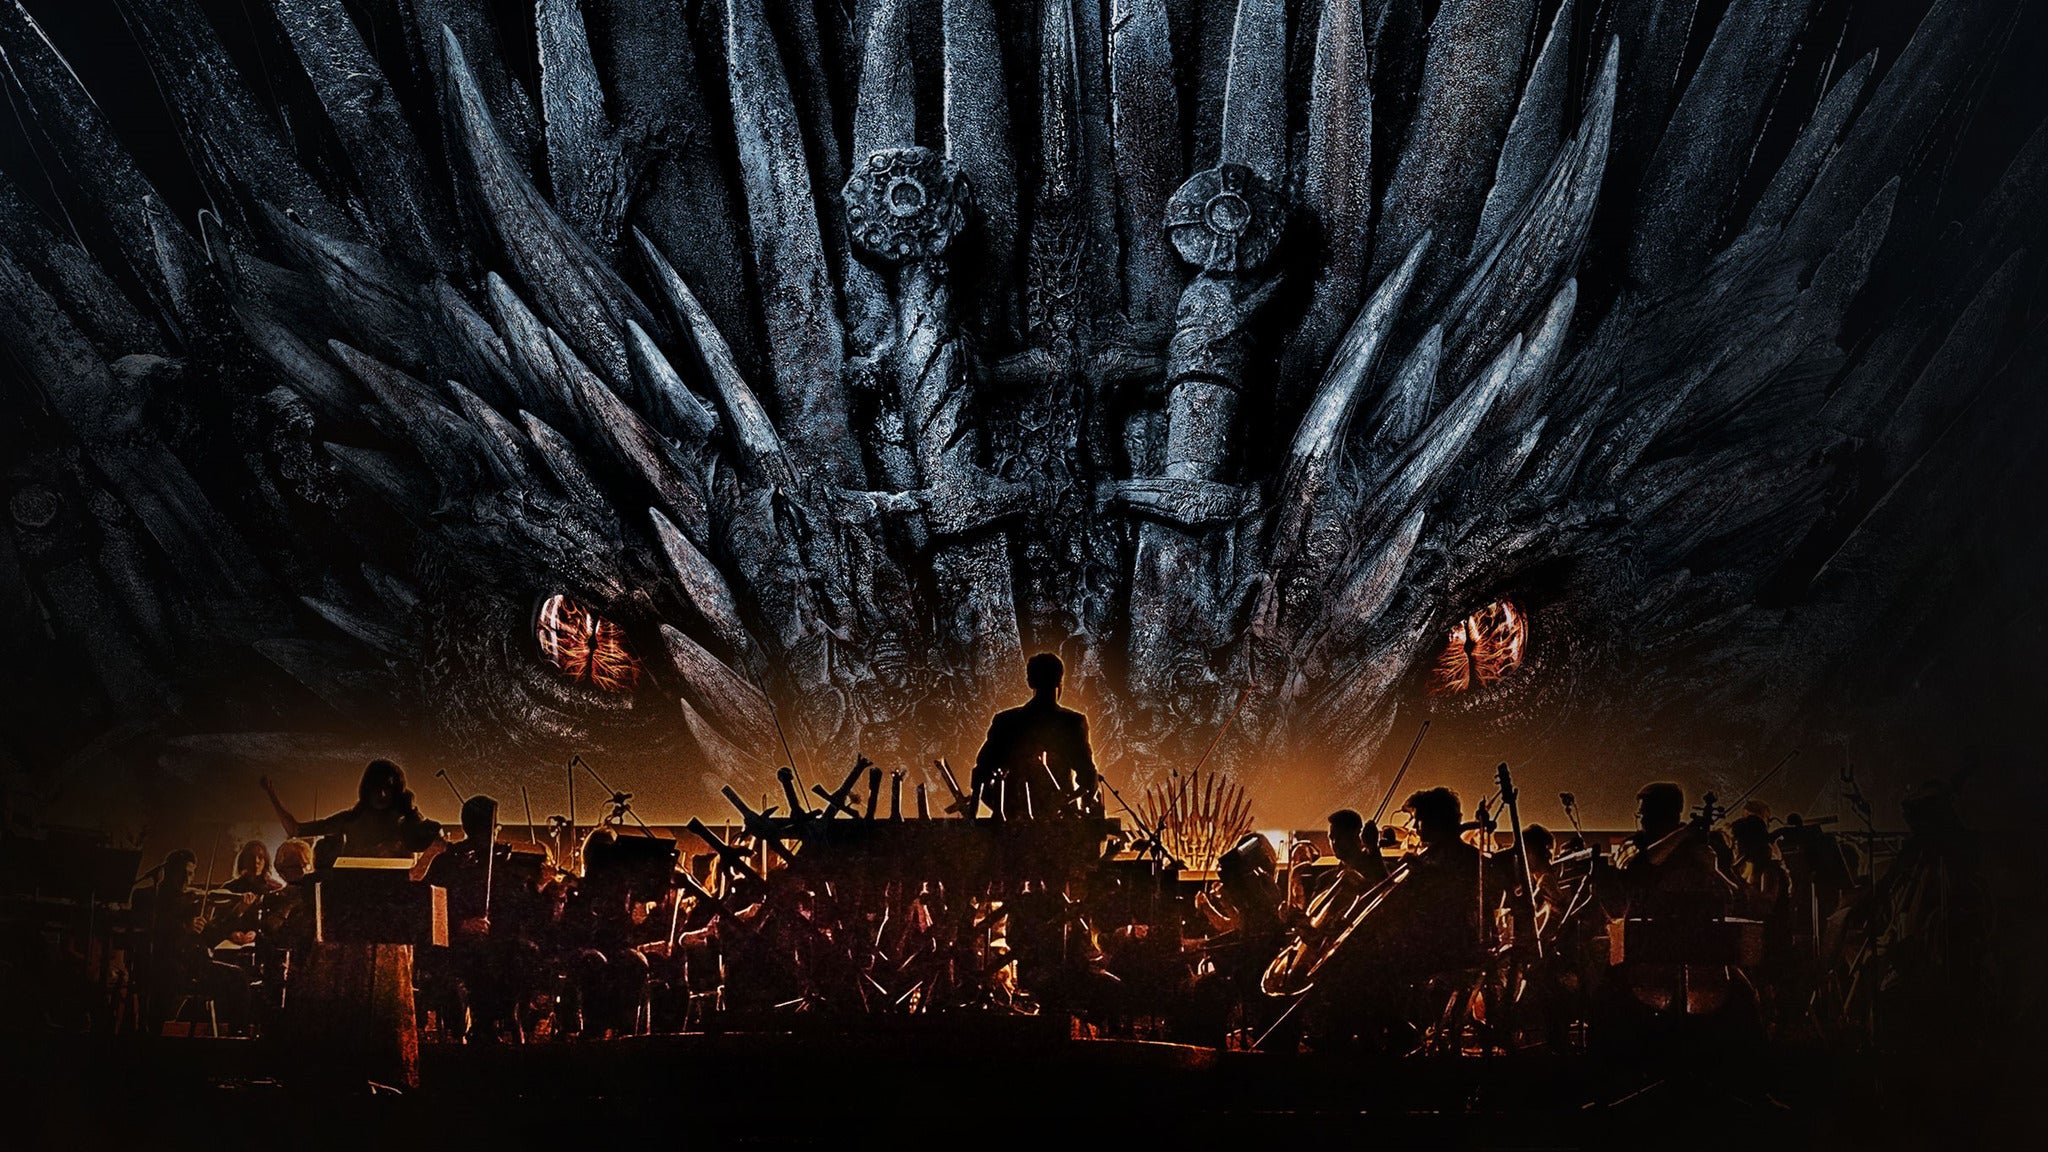 Game of Thrones Live Concert Experience in Sunrise promo photo for 3D Collector Ticket presale offer code